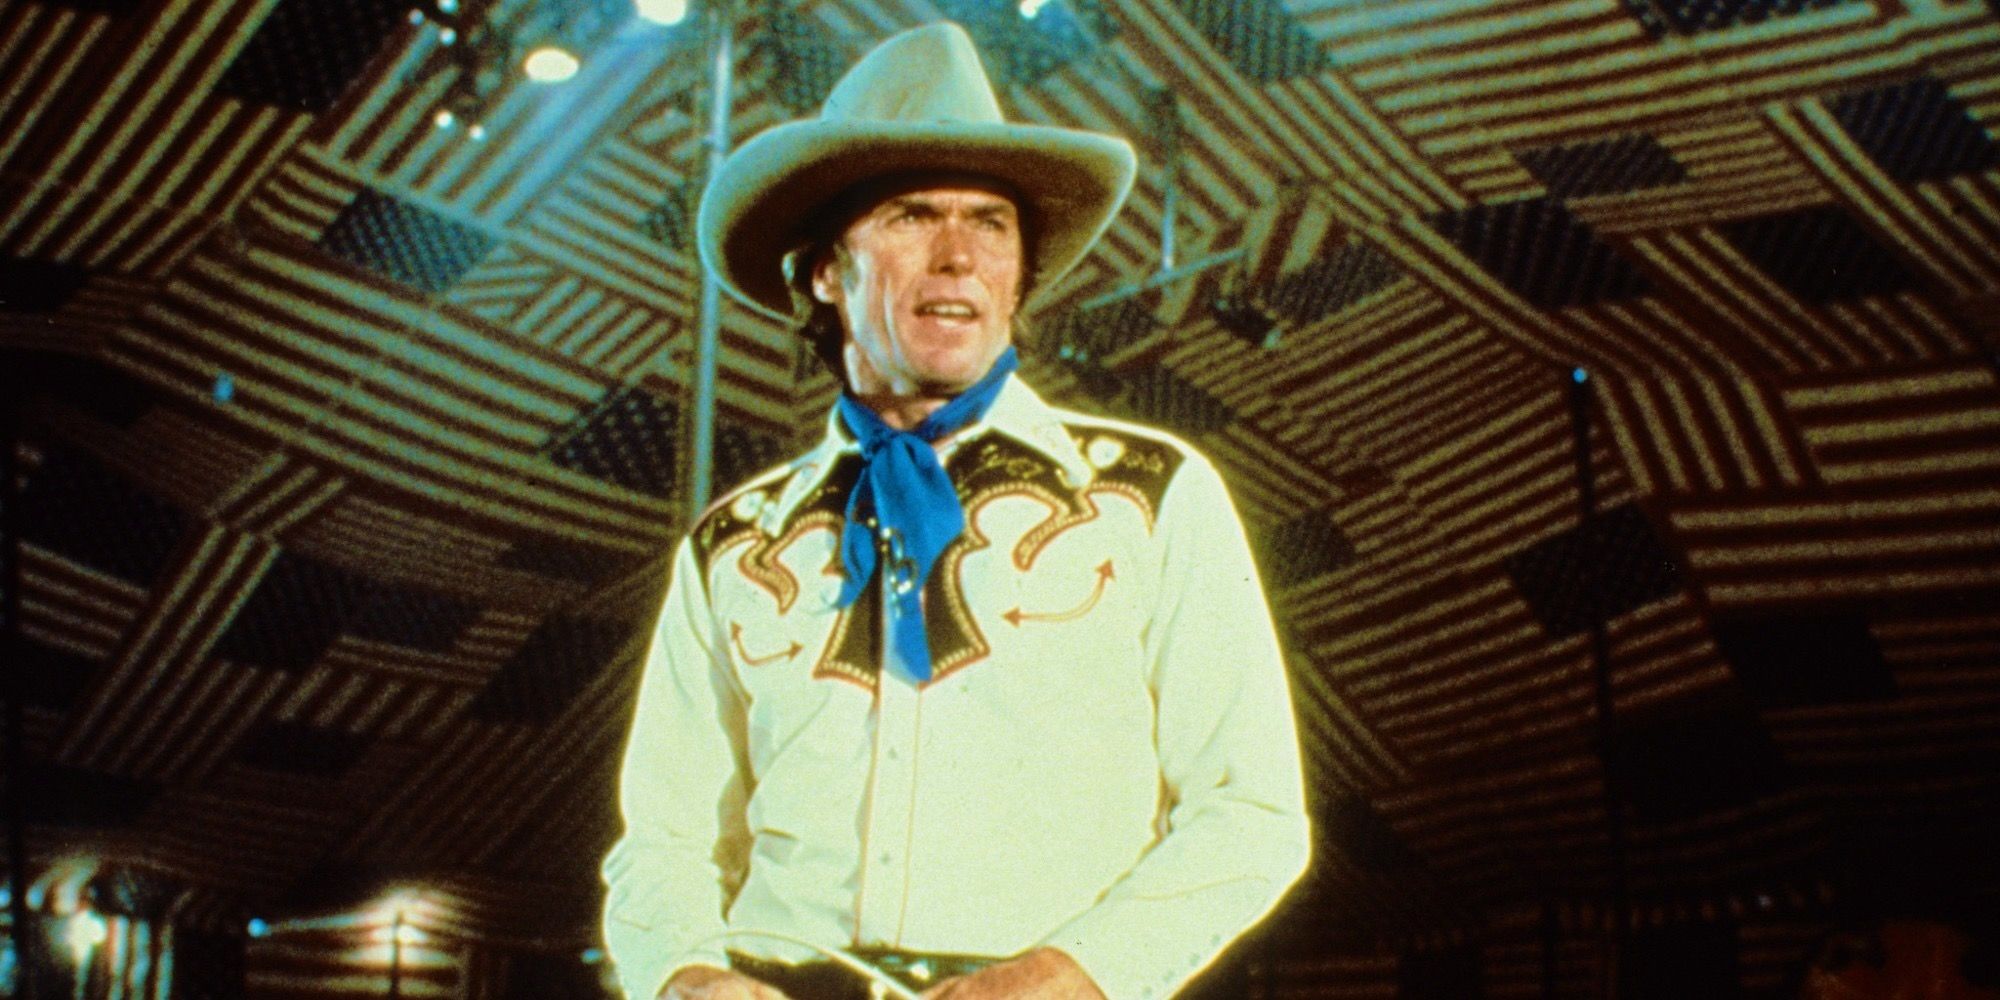 Clint Eastwood as Bronco Billy